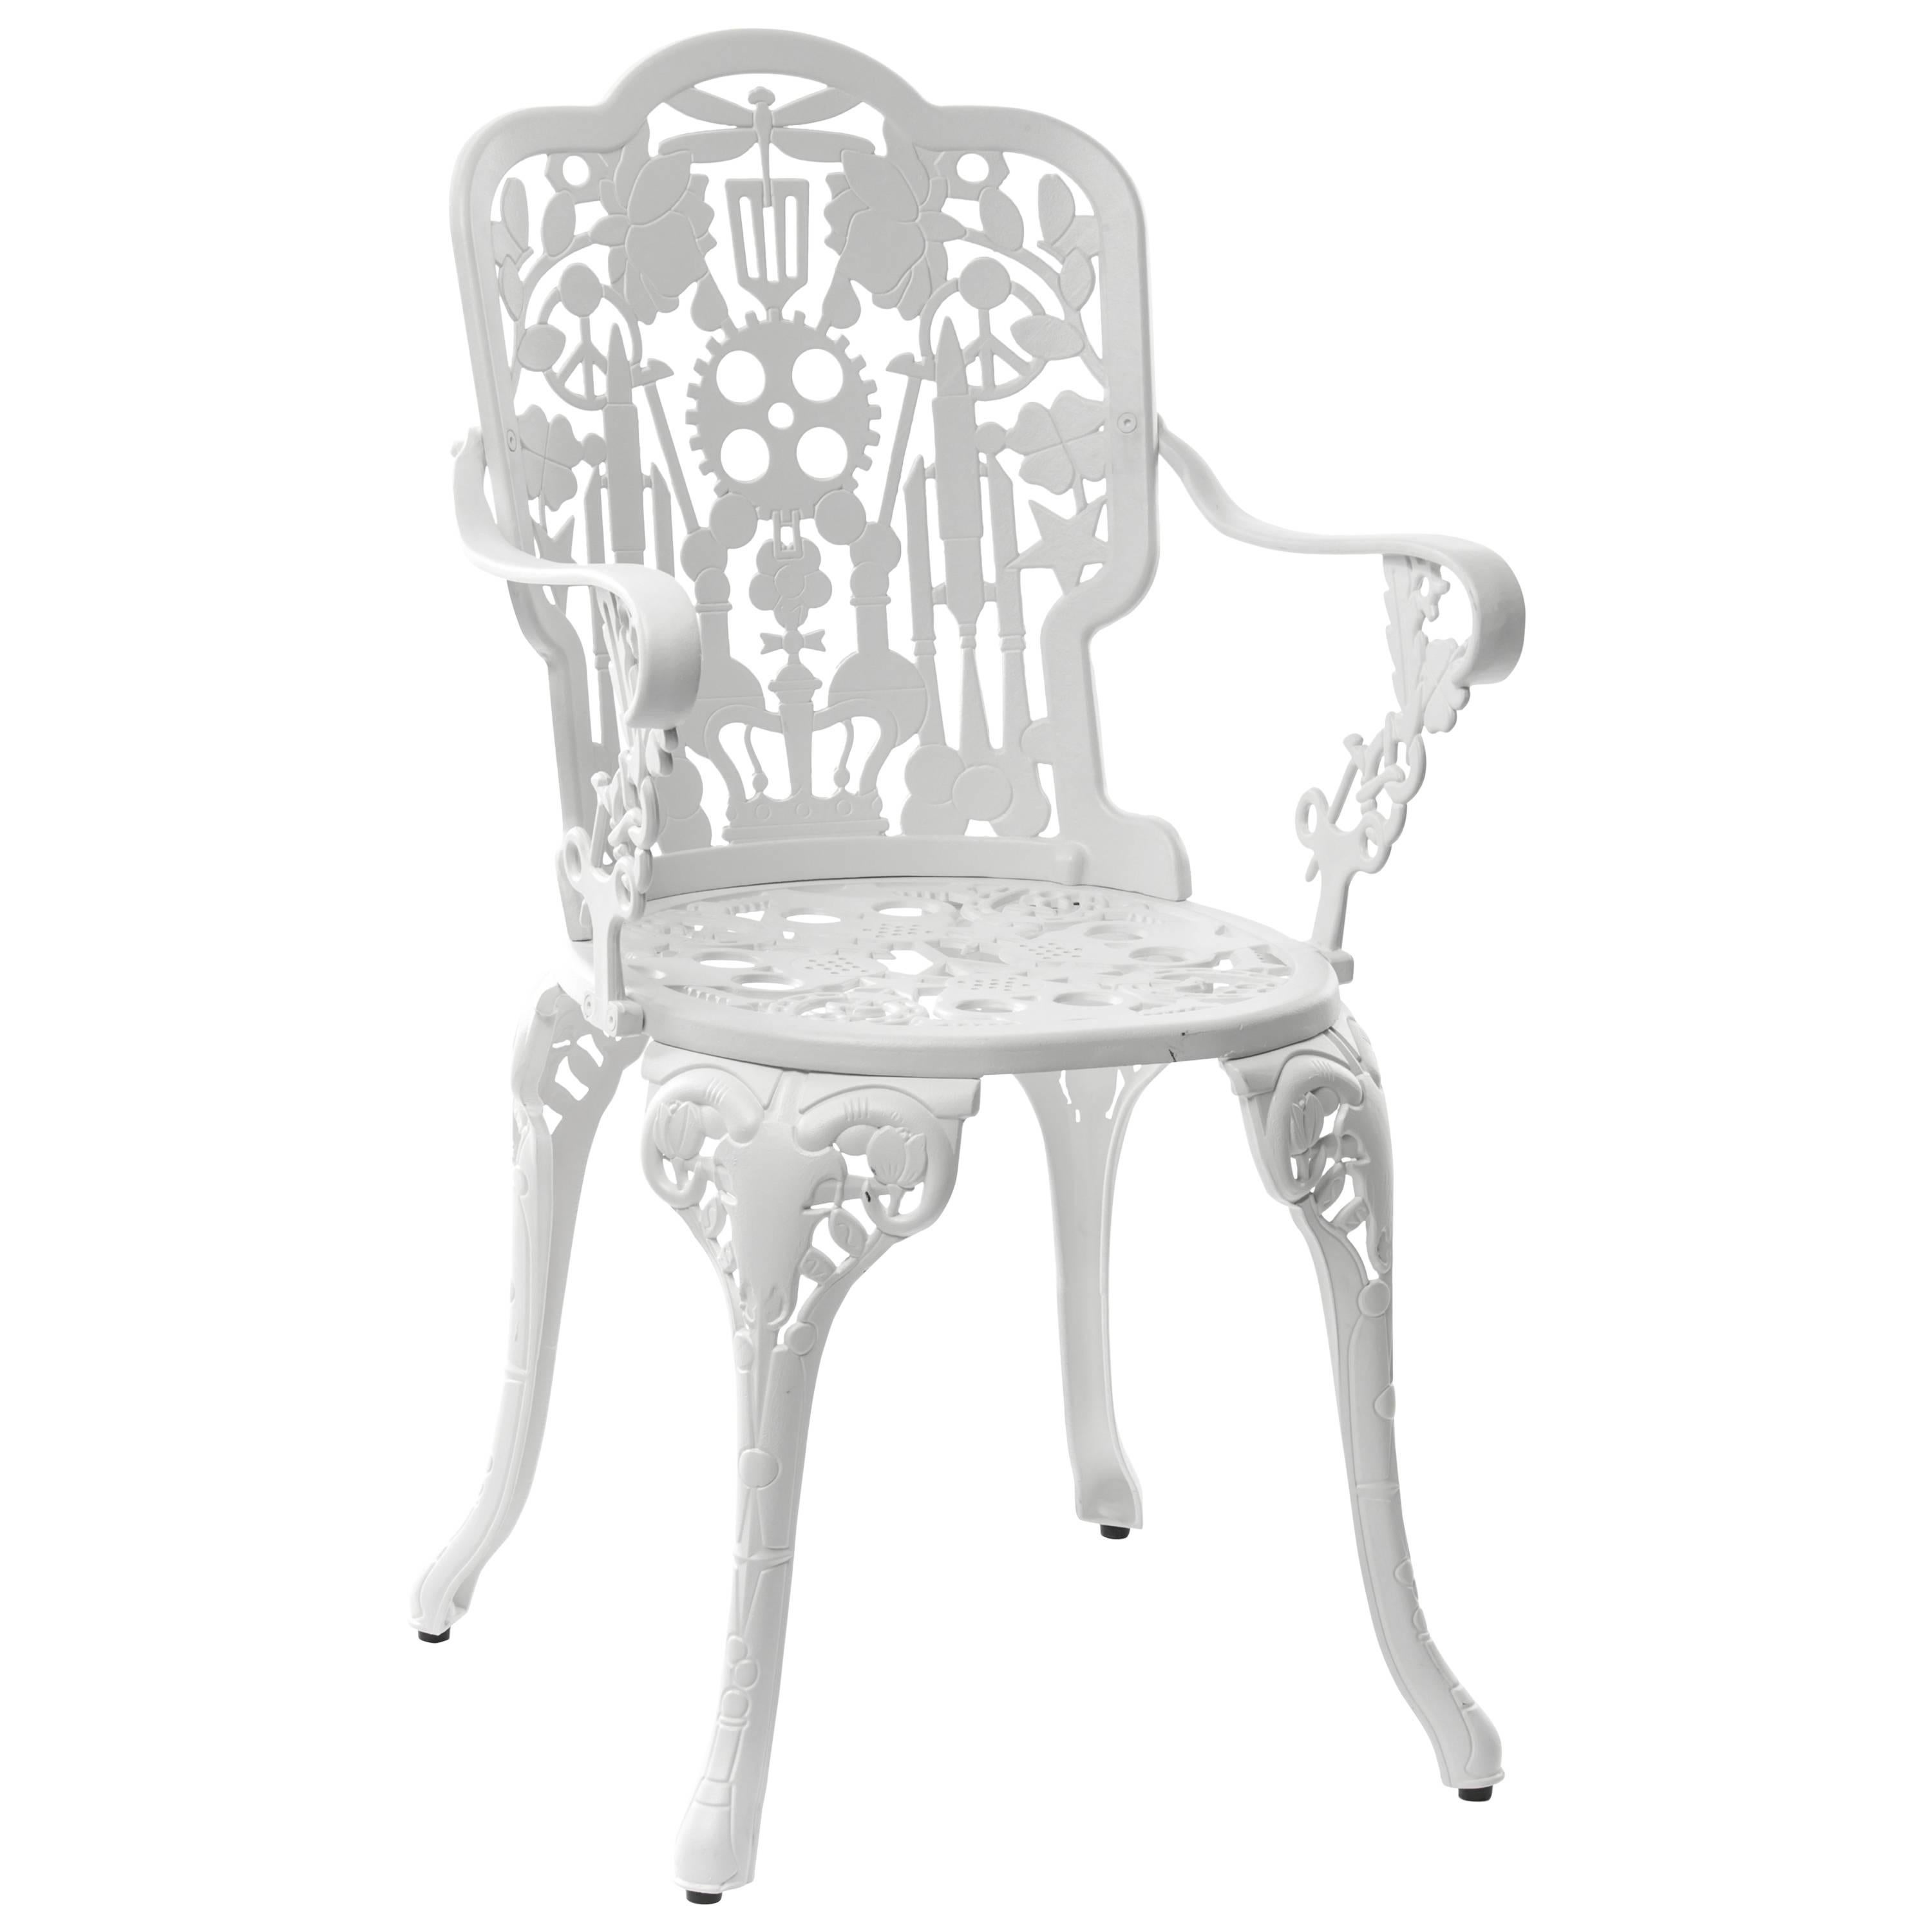 Aluminum Armchair "Industry Garden Furniture" by Seletti, White For Sale